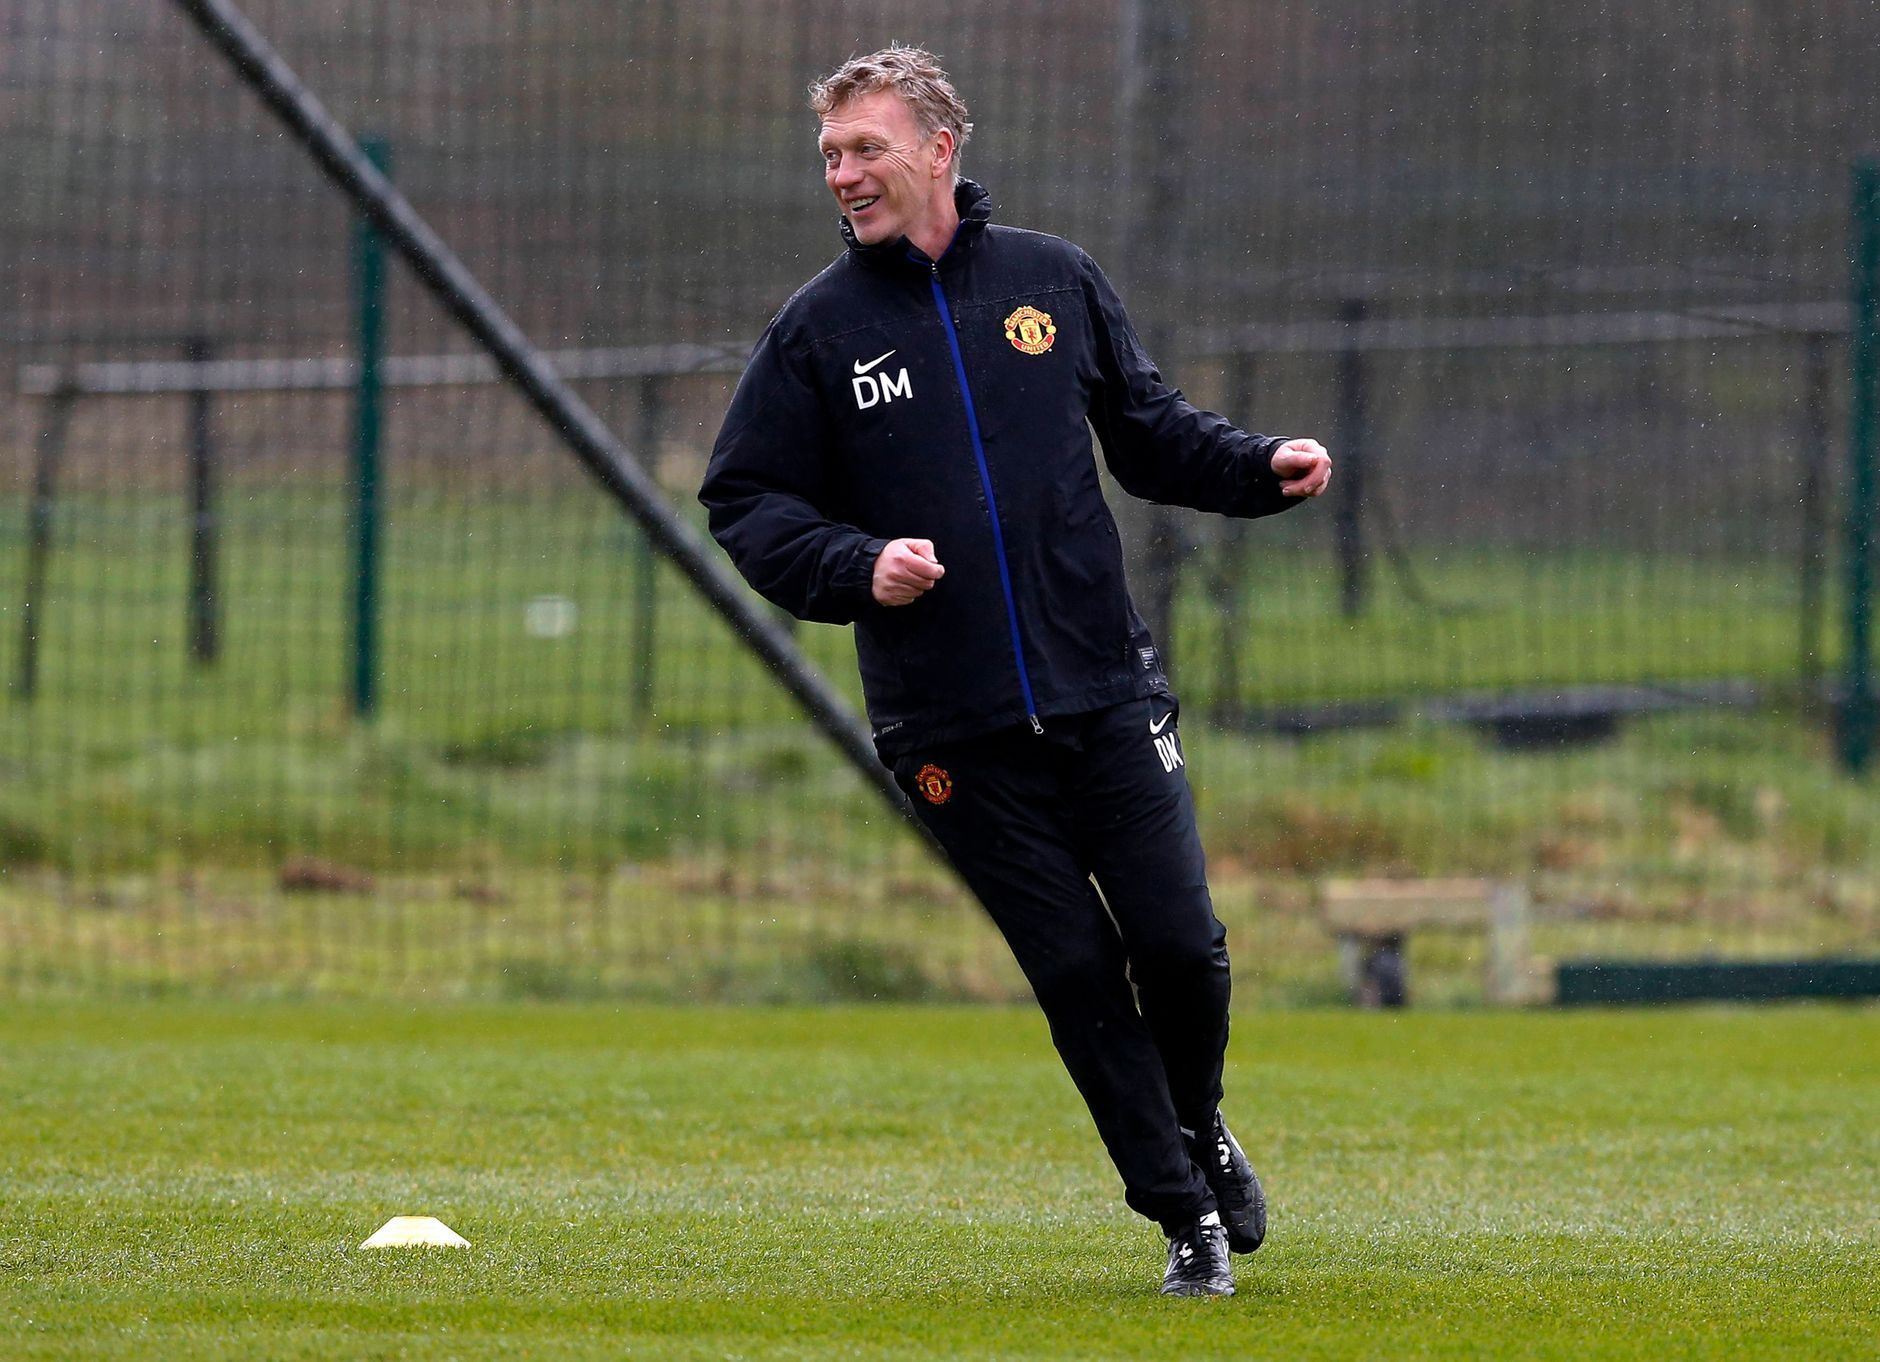 Manchester United's manager Moyes smiles during a training session at the club's Carrington training complex in Manchester